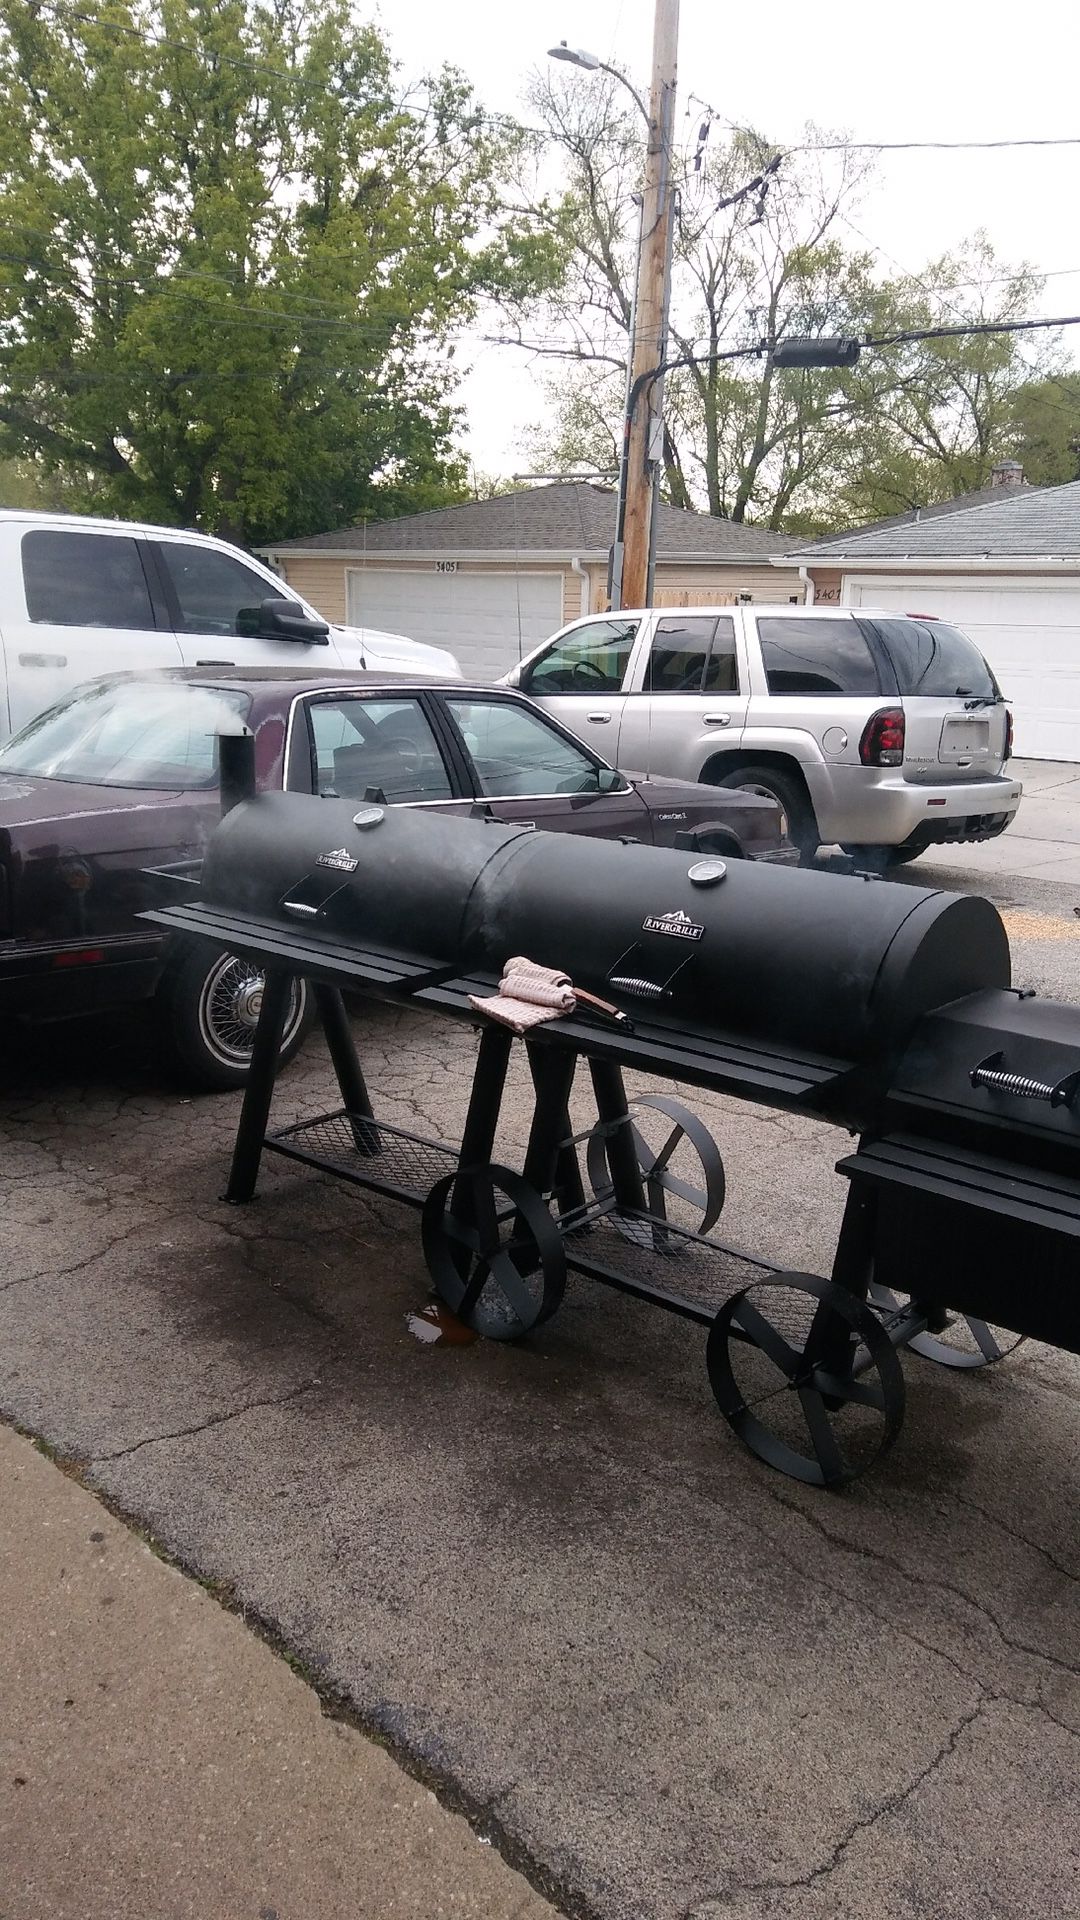 2 Universal BBQ grill and smokers